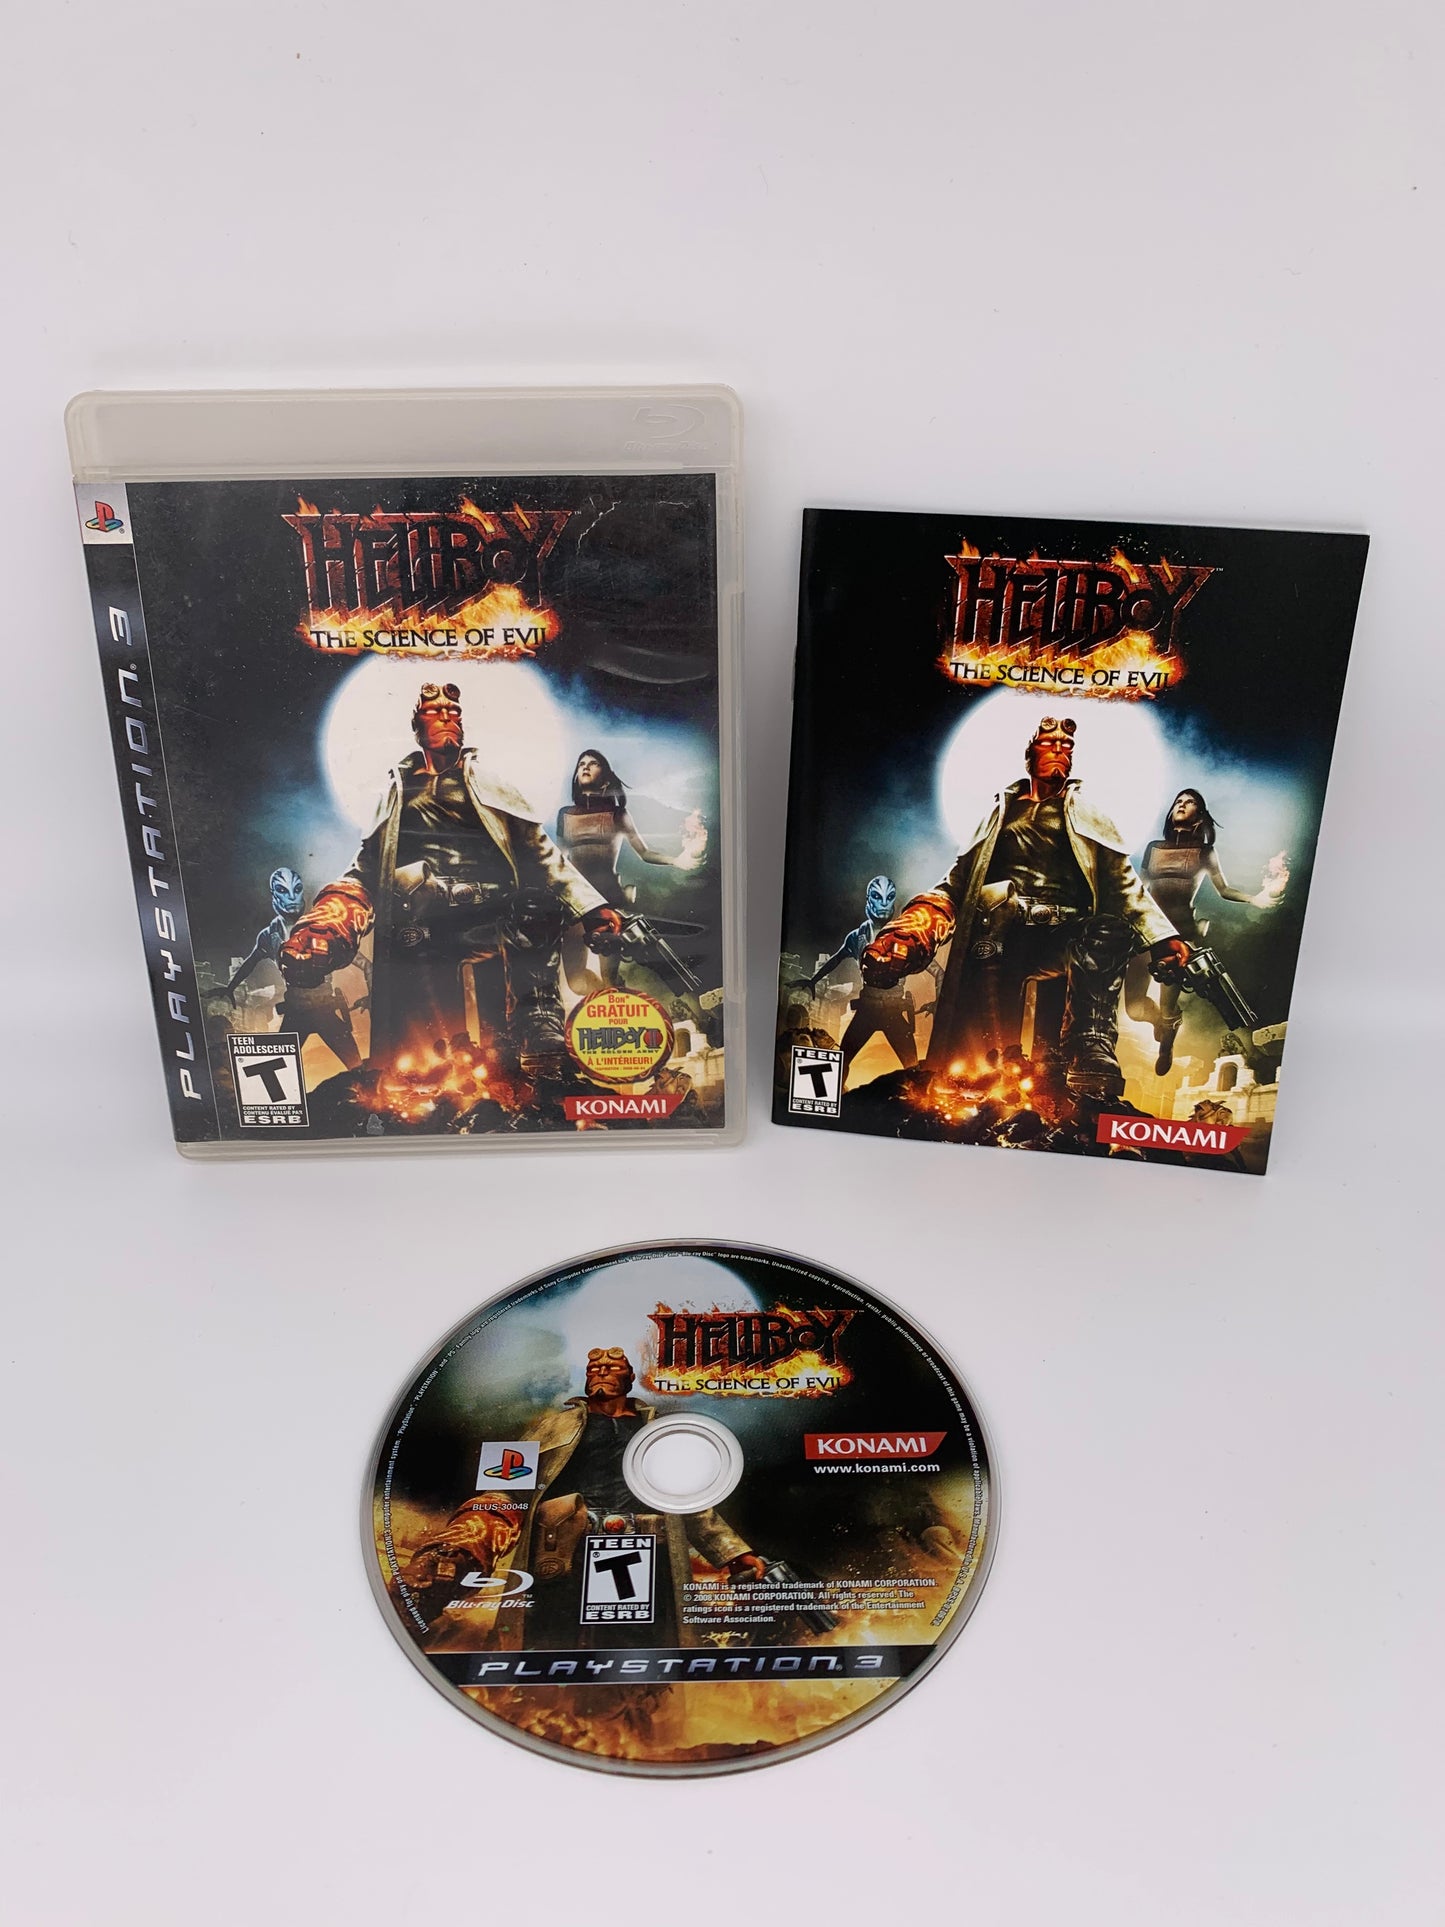 PiXEL-RETRO.COM : sony playstation 3 ps3 hellboy the science of evil complete game box manual ntsc